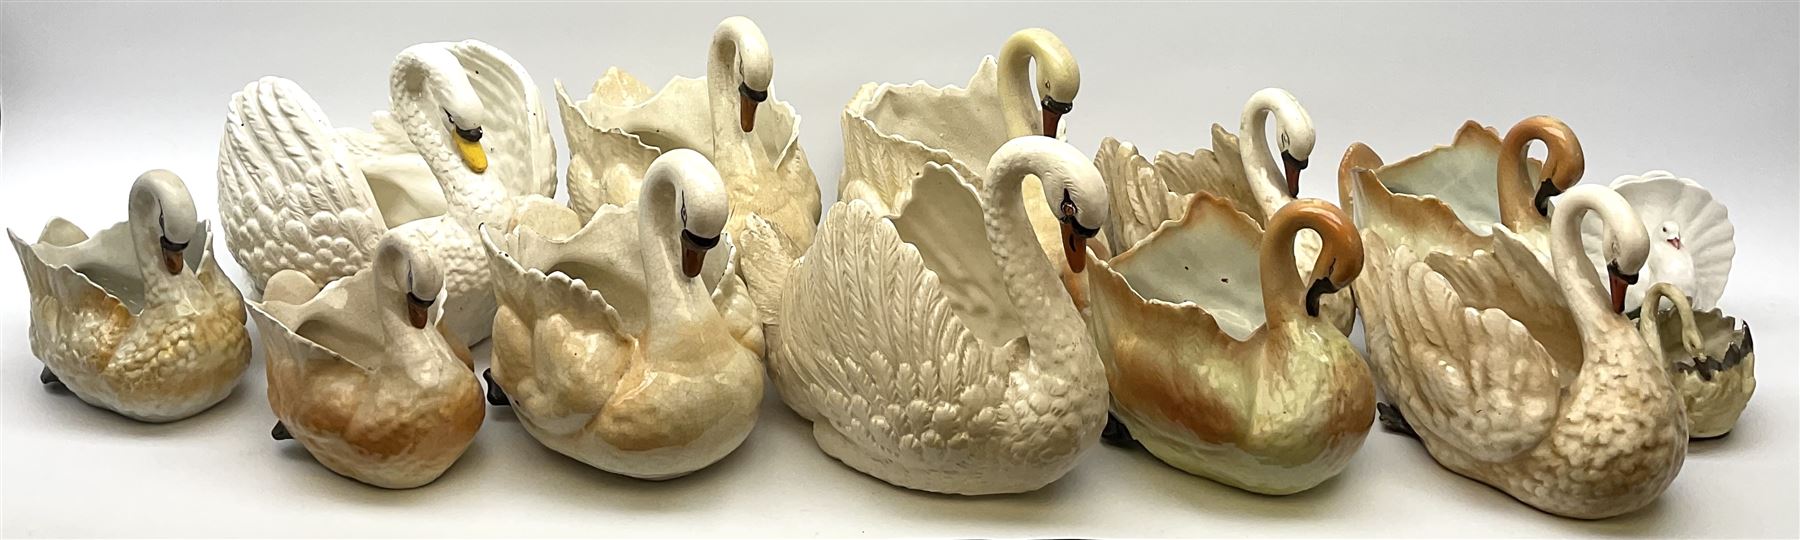 A large quantity of assorted sized ceramic planters modelled as swans.